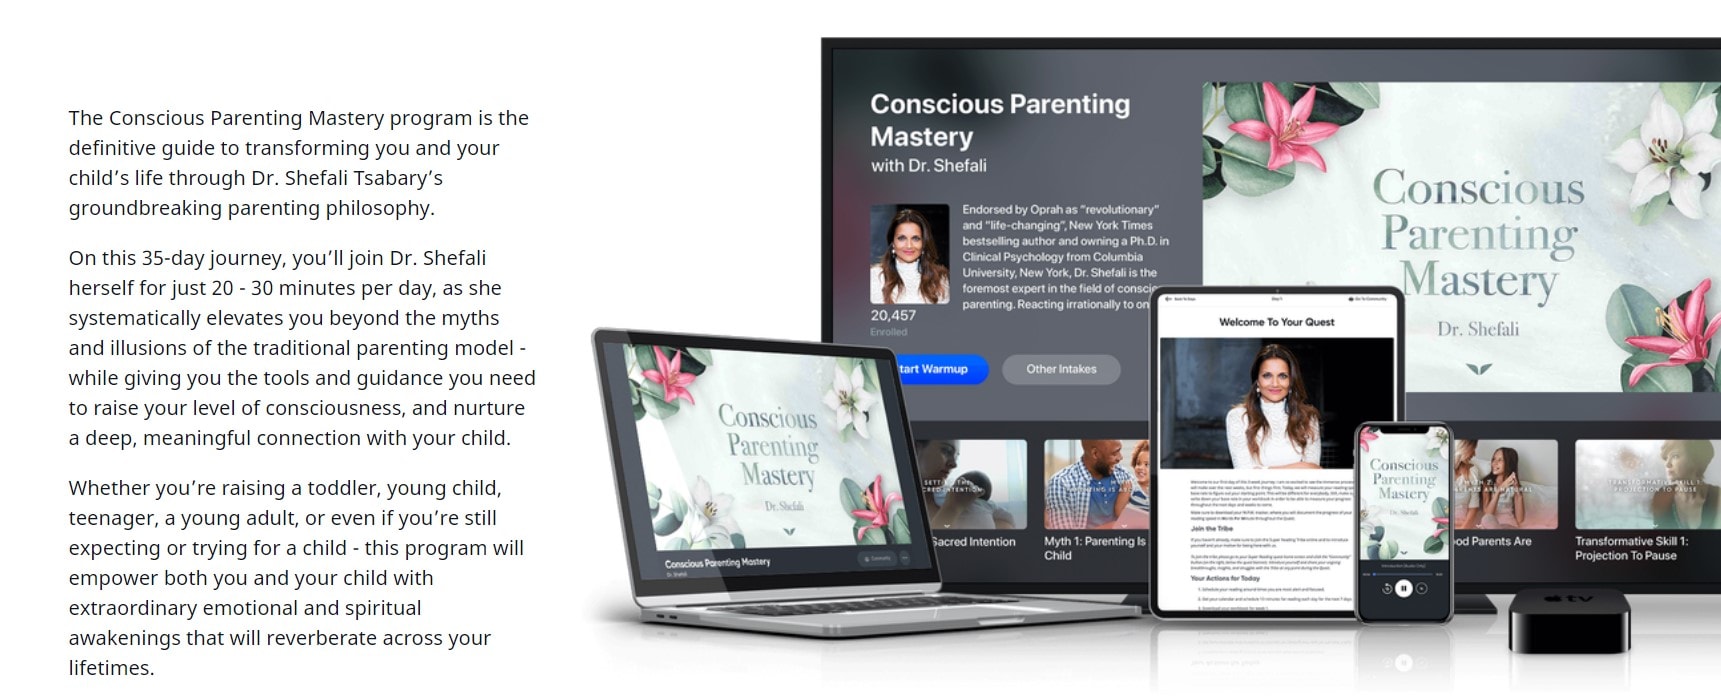 Parenting Mastery Review Course Information